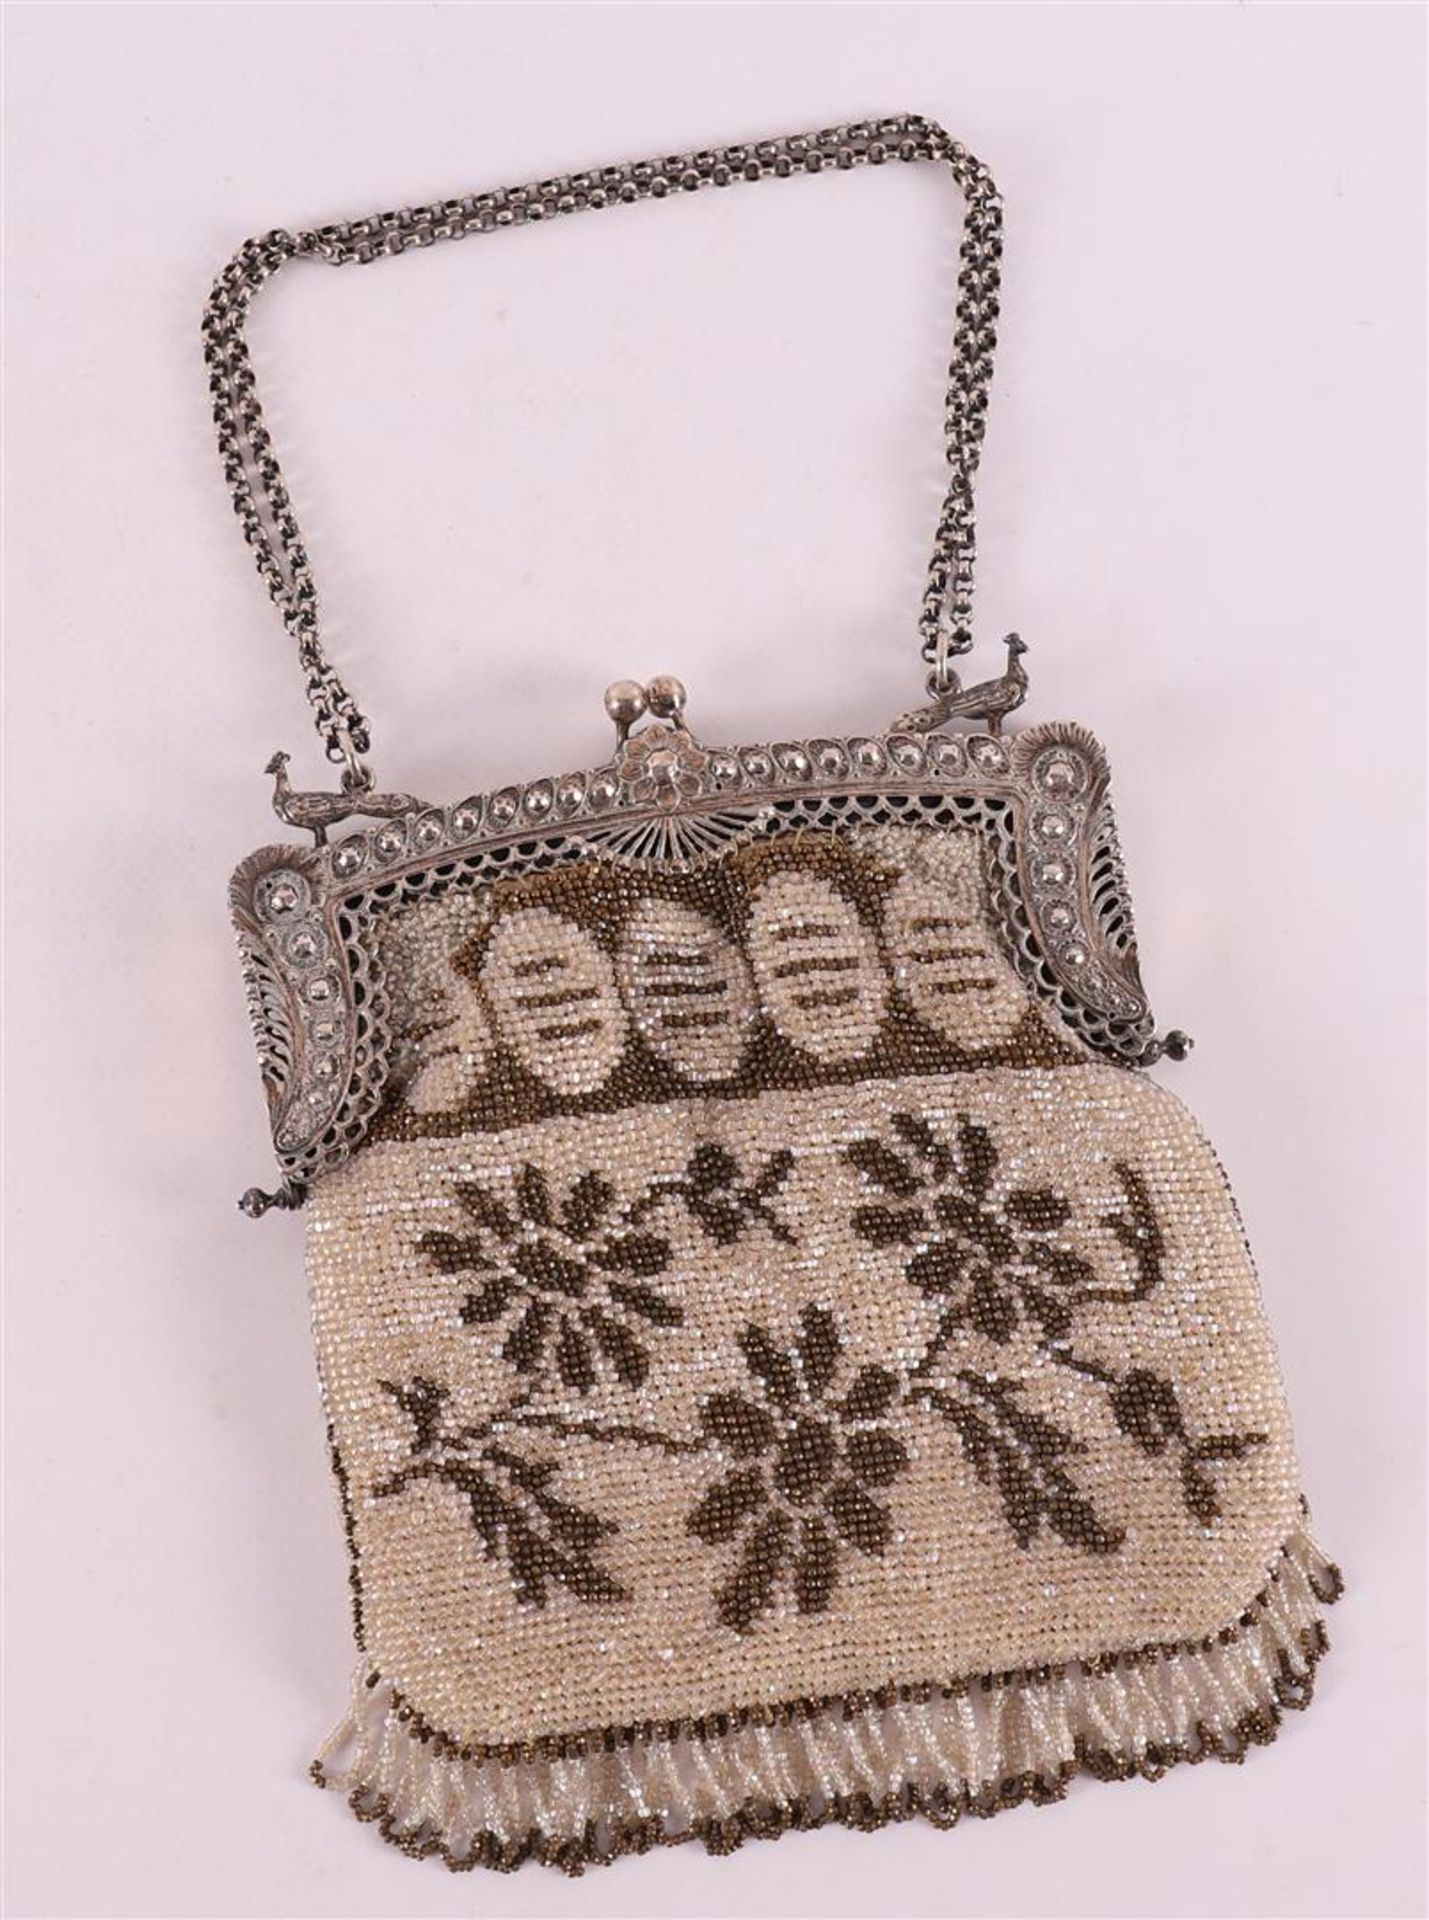 A 3rd grade 800/1000 silver bag bracket with jasseron necklace, on a beaded bag.